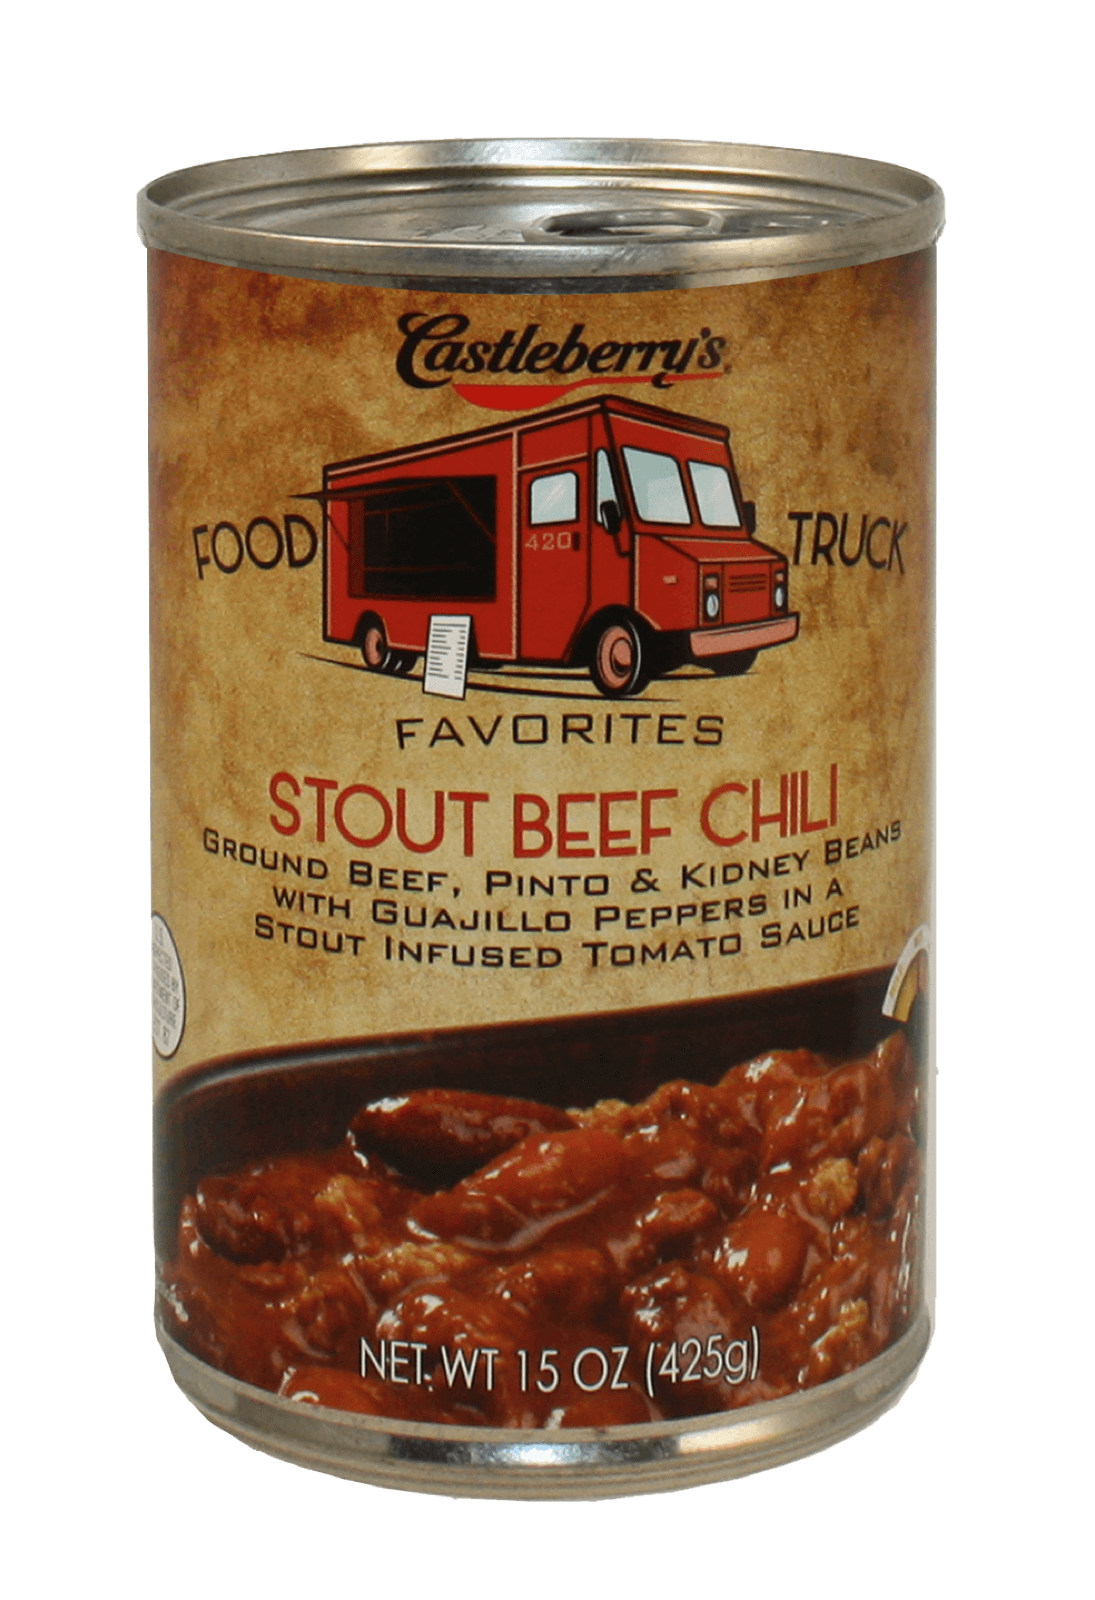 Castleberry's Food Truck Favorites Stout Beef Chili 15oz 30300-07380-0 image (1)